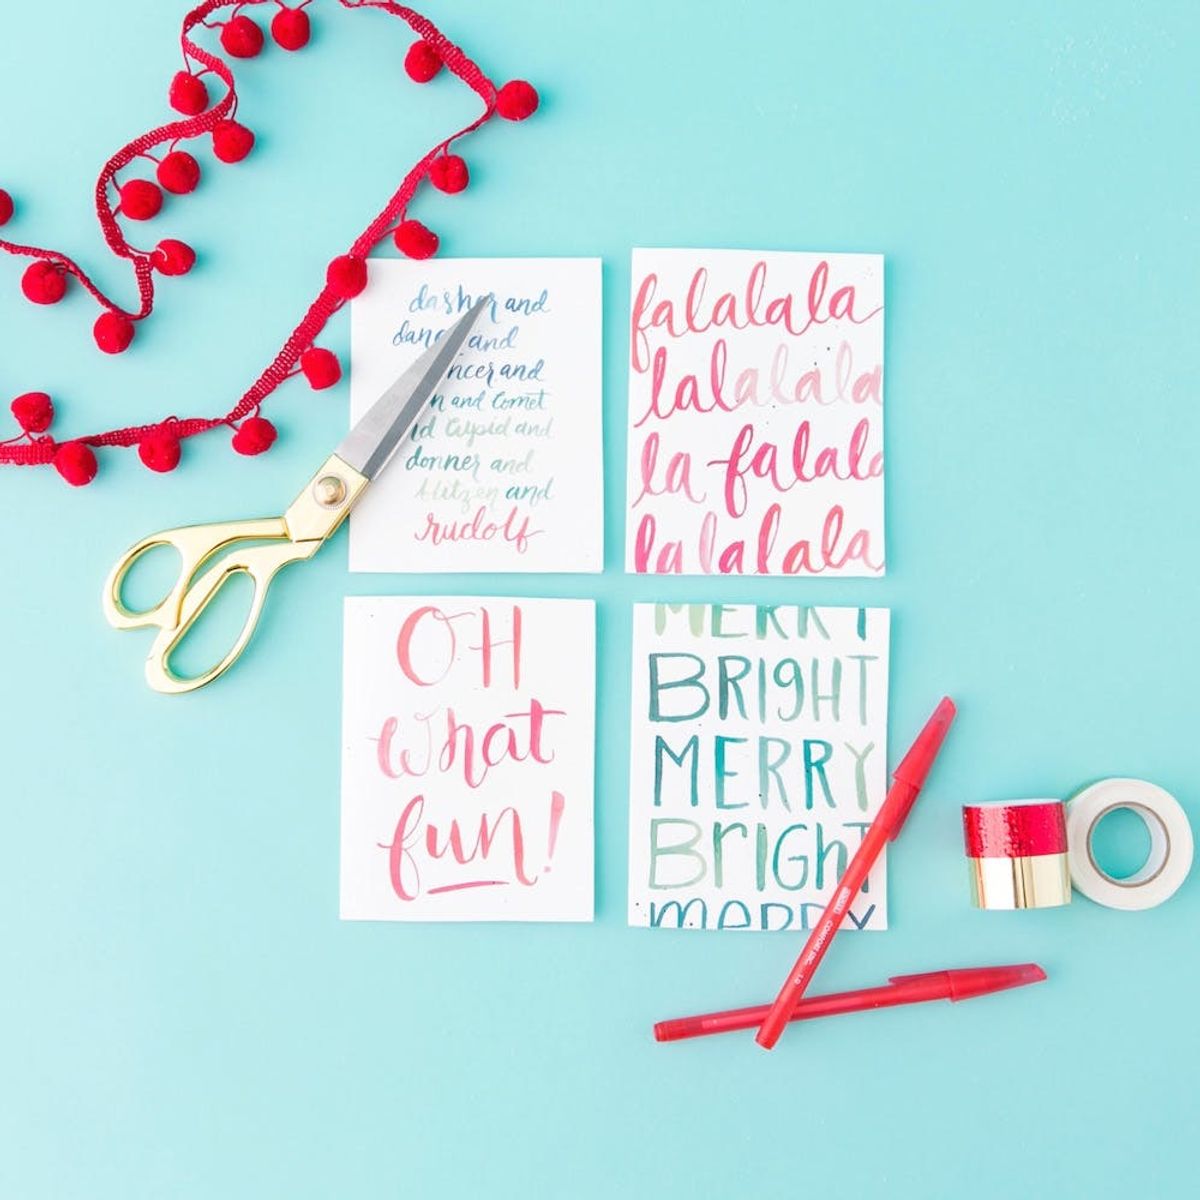 Free Printable Friday: Festive Hand-Lettered Holiday Cards